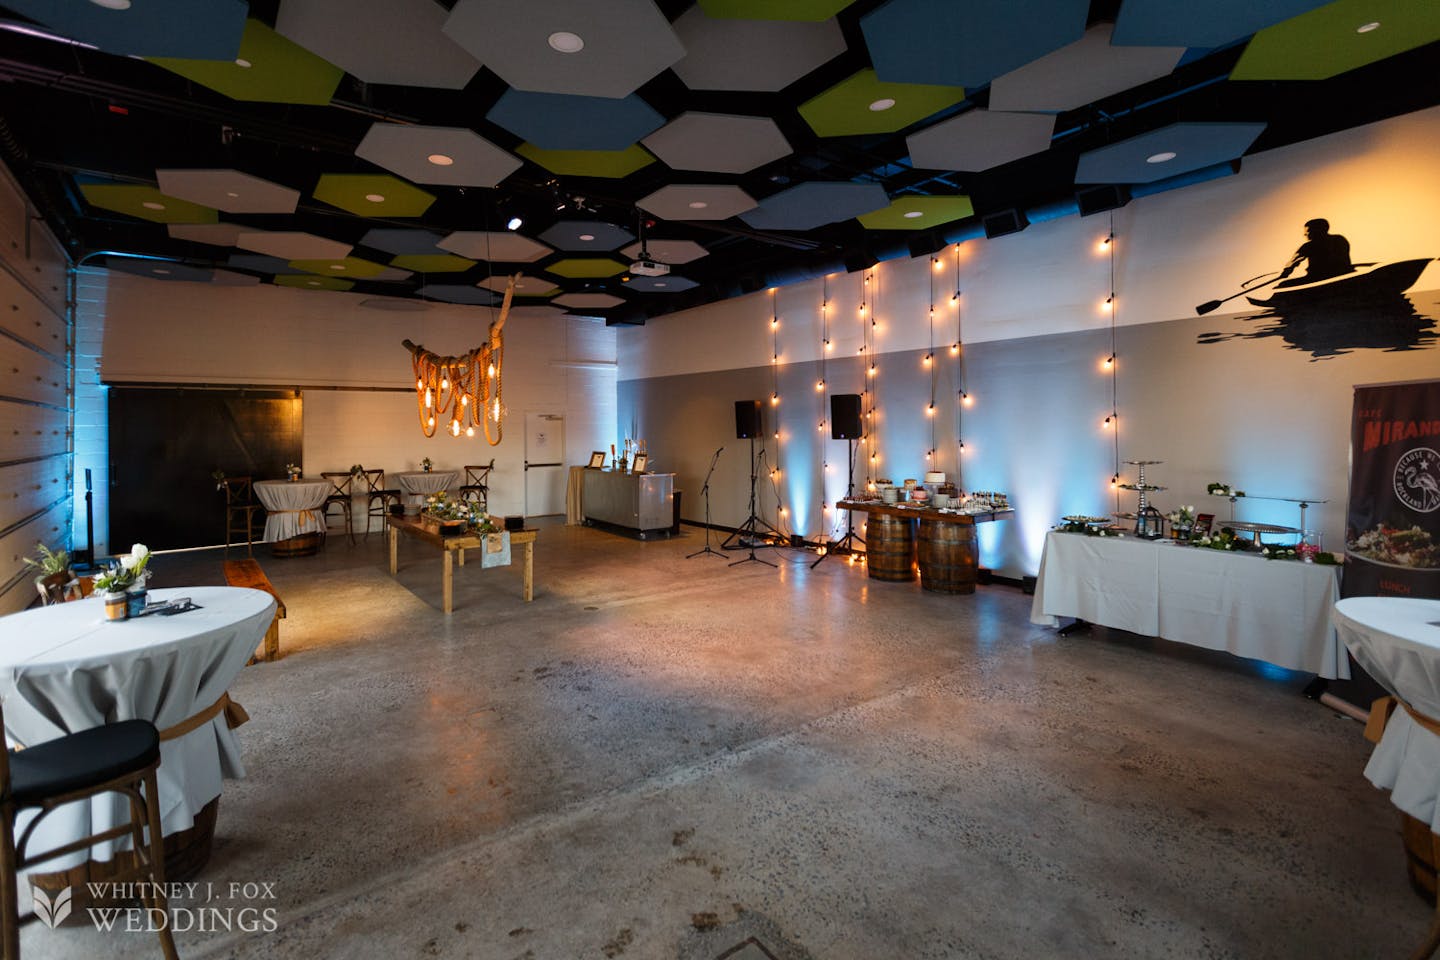 Brewing Up Weddings Event for Rising Tide’s East Room Grand Opening on the evening of Thursday, January 18, 2018.  About 150 Maine wedding industry vendors enjoyed a casual winter night out on Portland’s peninsula with colleagues new and old. Particip